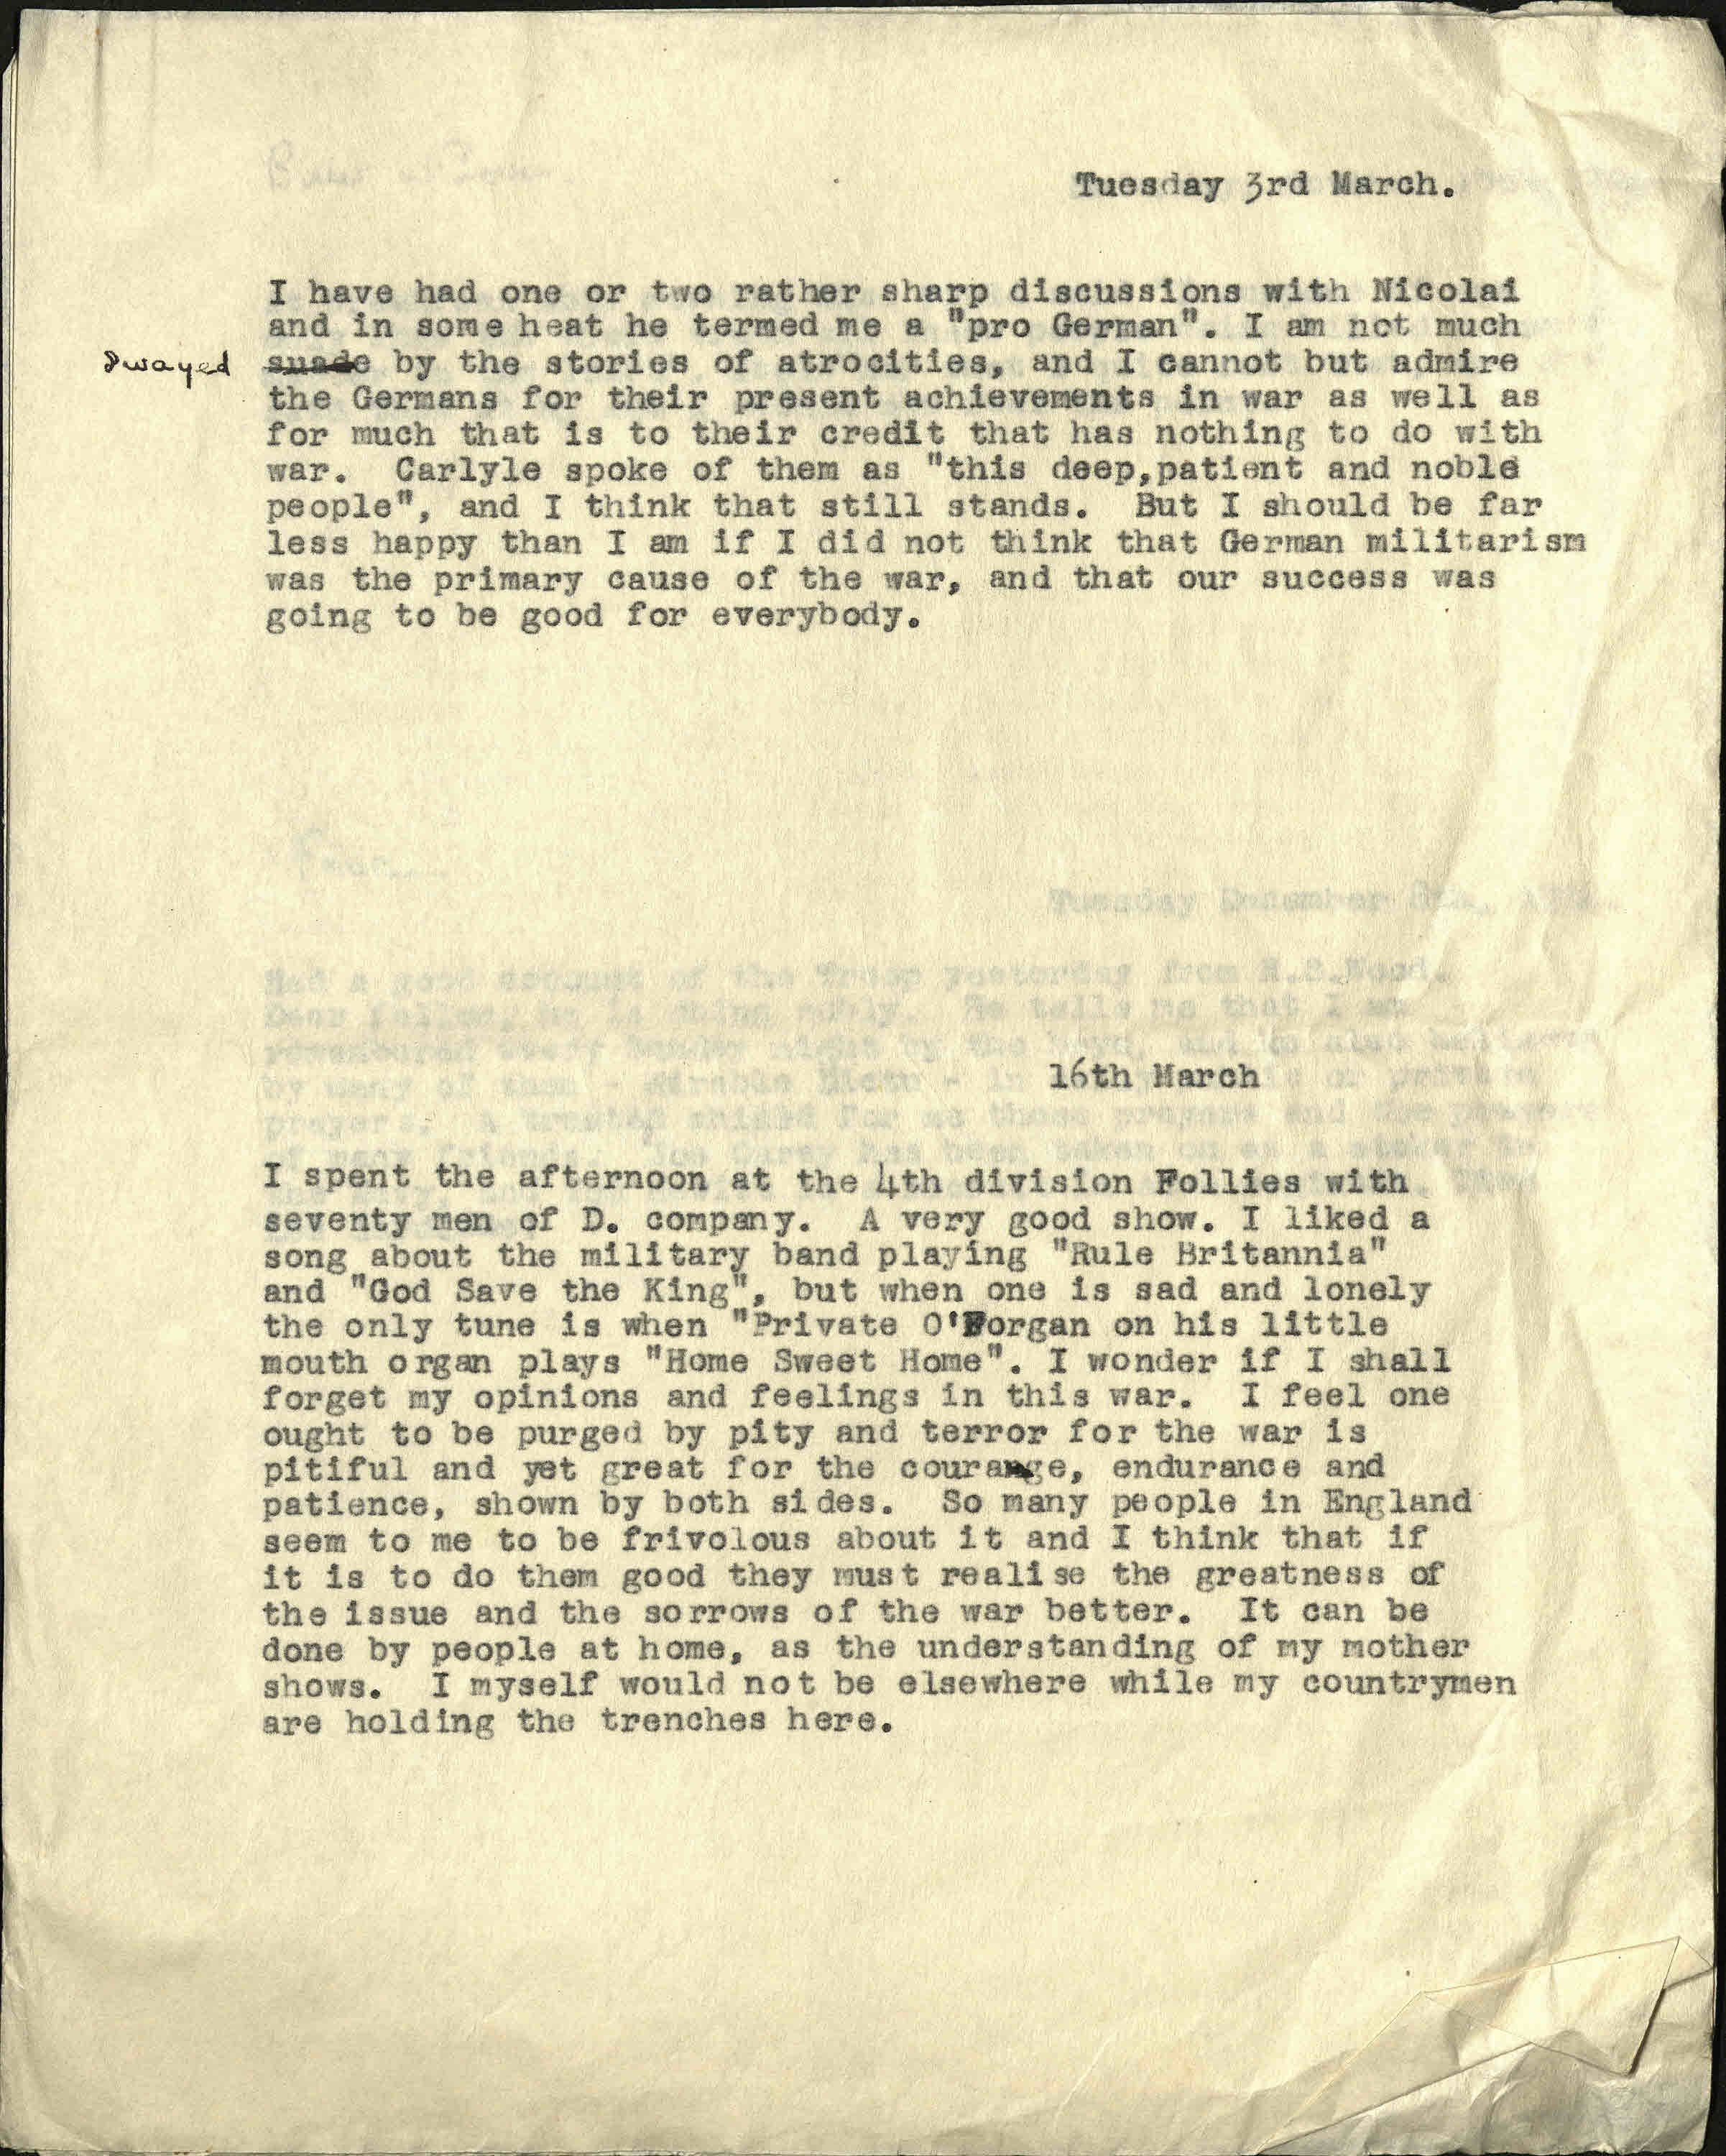 Extract from letters sent by Edith Ramsay's brother